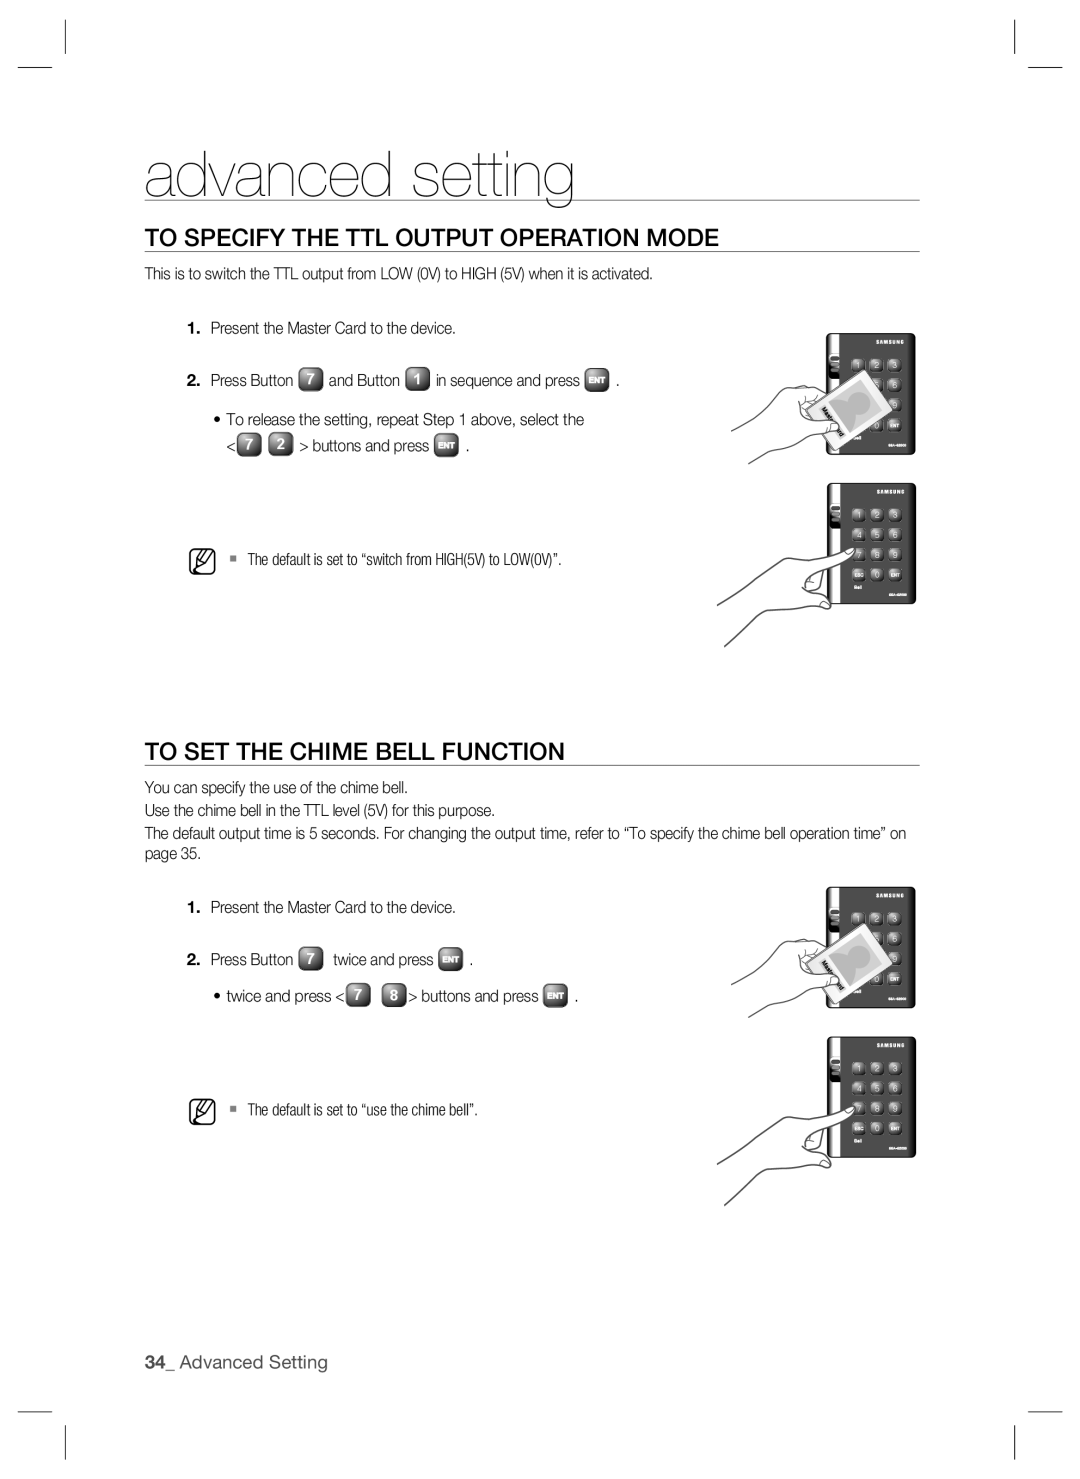 Samsung SSA-S2000W user manual advanced setting, To Specify The Ttl Output Operation Mode, To Set The Chime Bell Function 